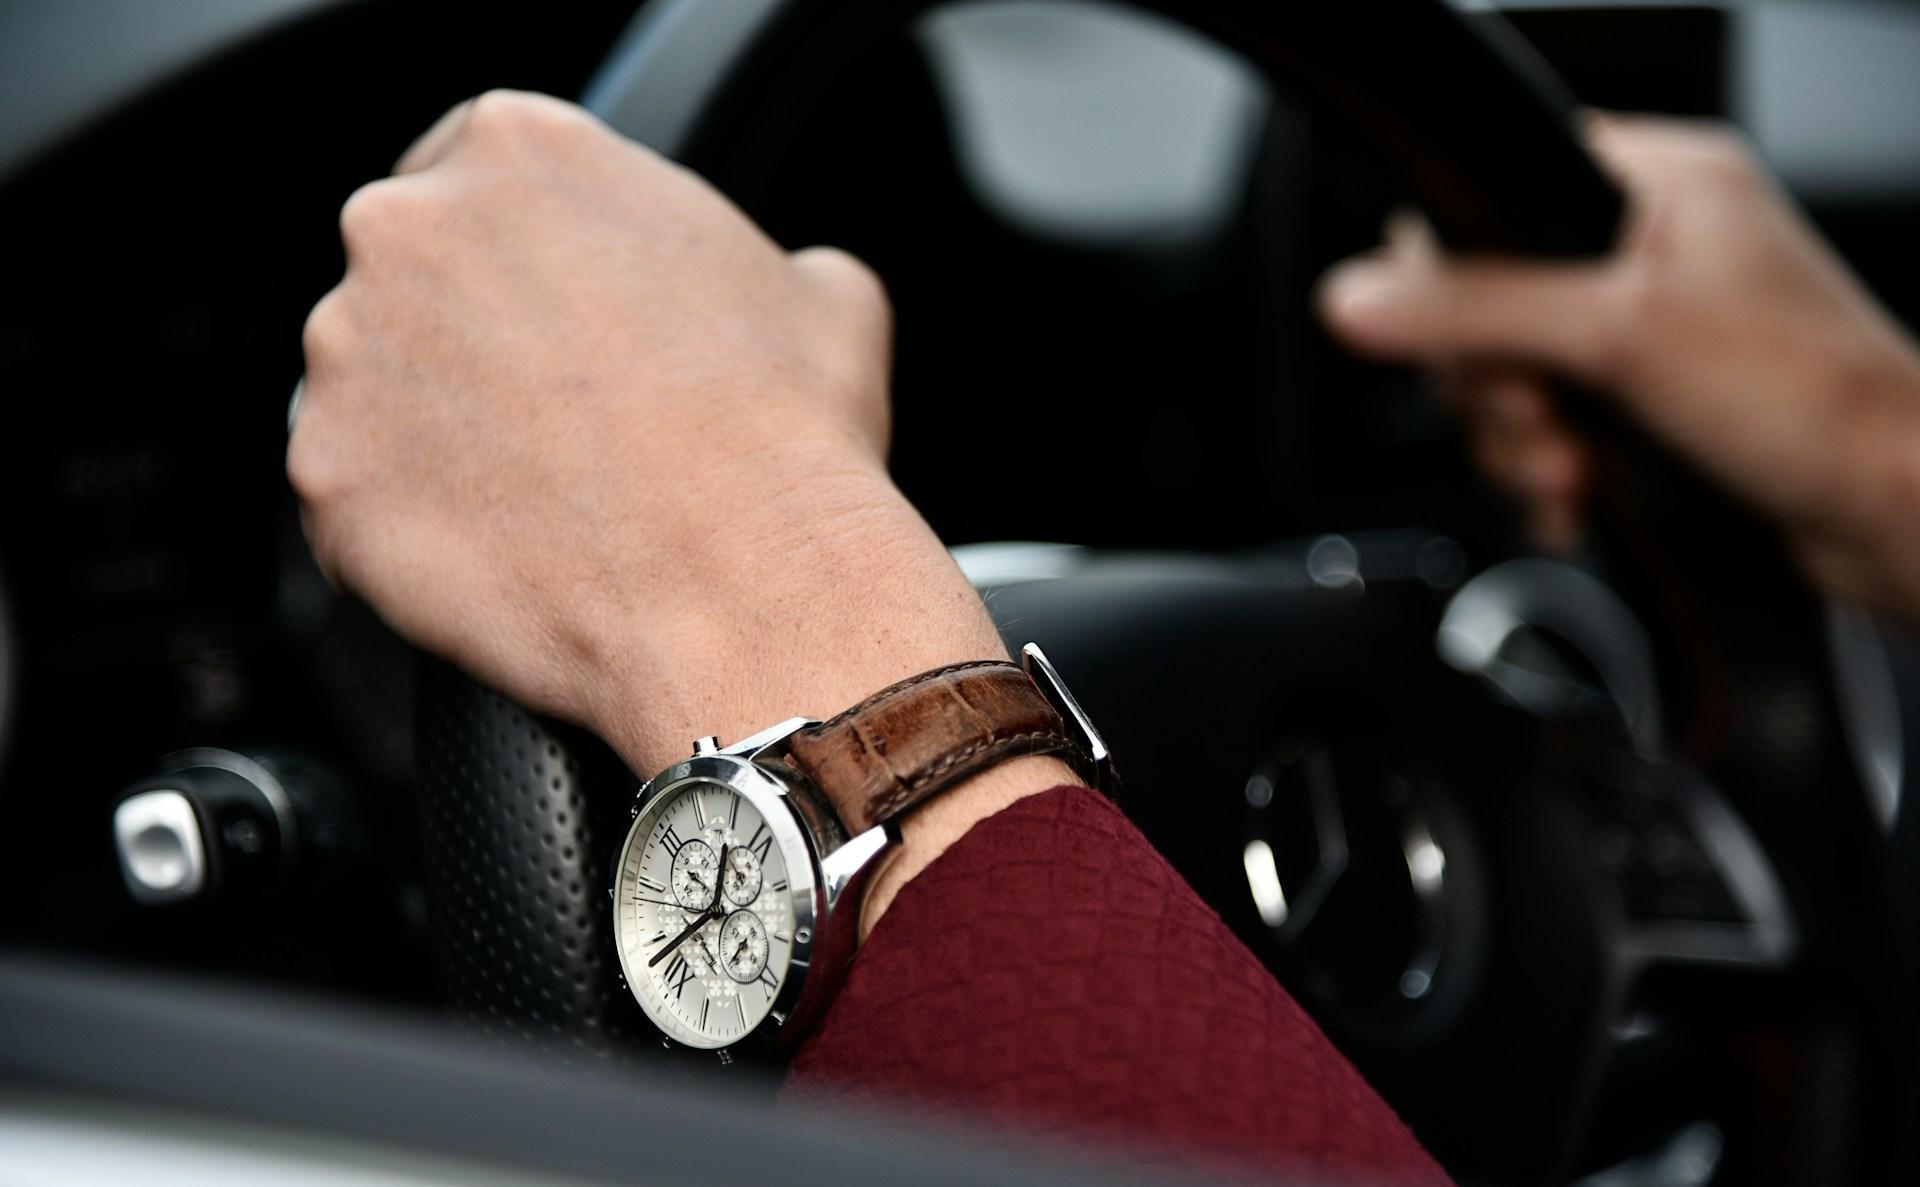 a person’s hands holding a steering wheel and wearing a watch with round case a leather strap.